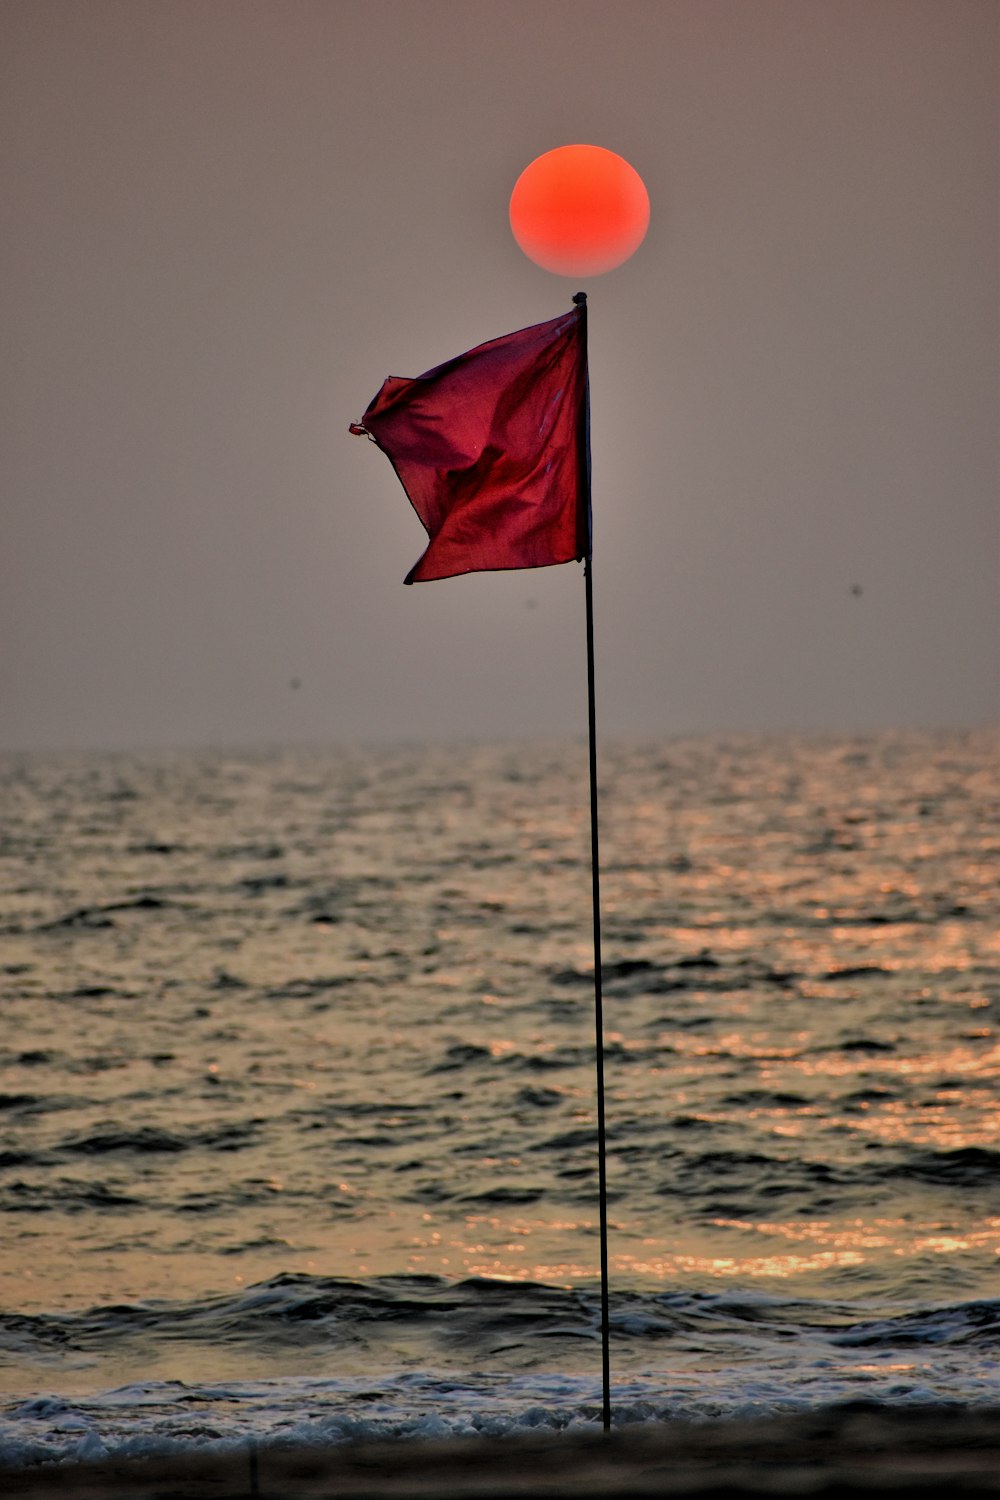 red flag on pole in the middle of the sea